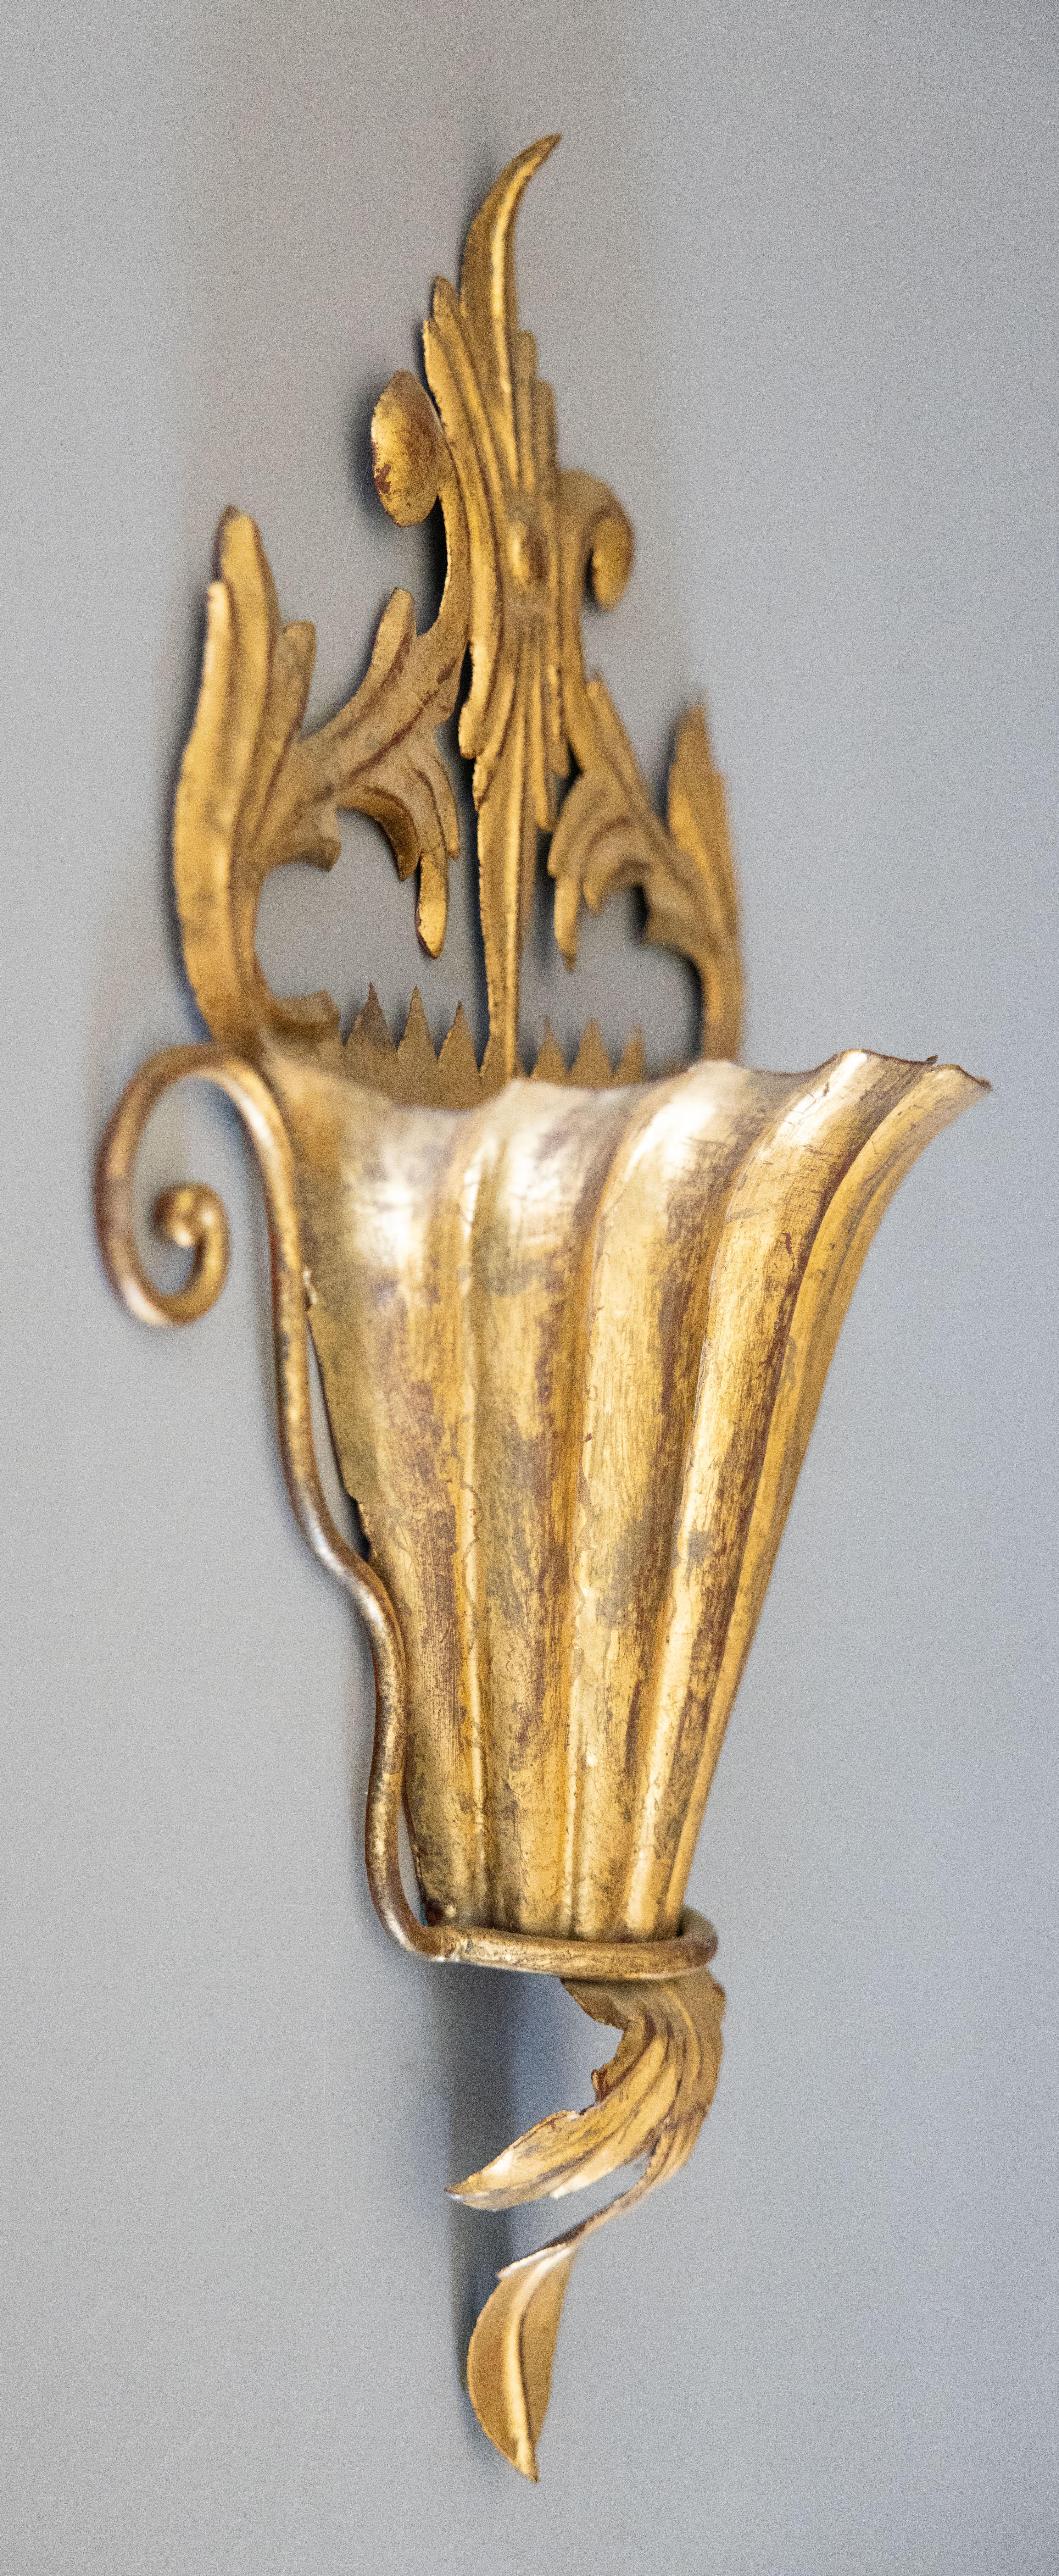 Hollywood Regency Neoclassical Italian Palladio Gilt Tole Wall Pocket Planter Cachepot, circa 1950 For Sale